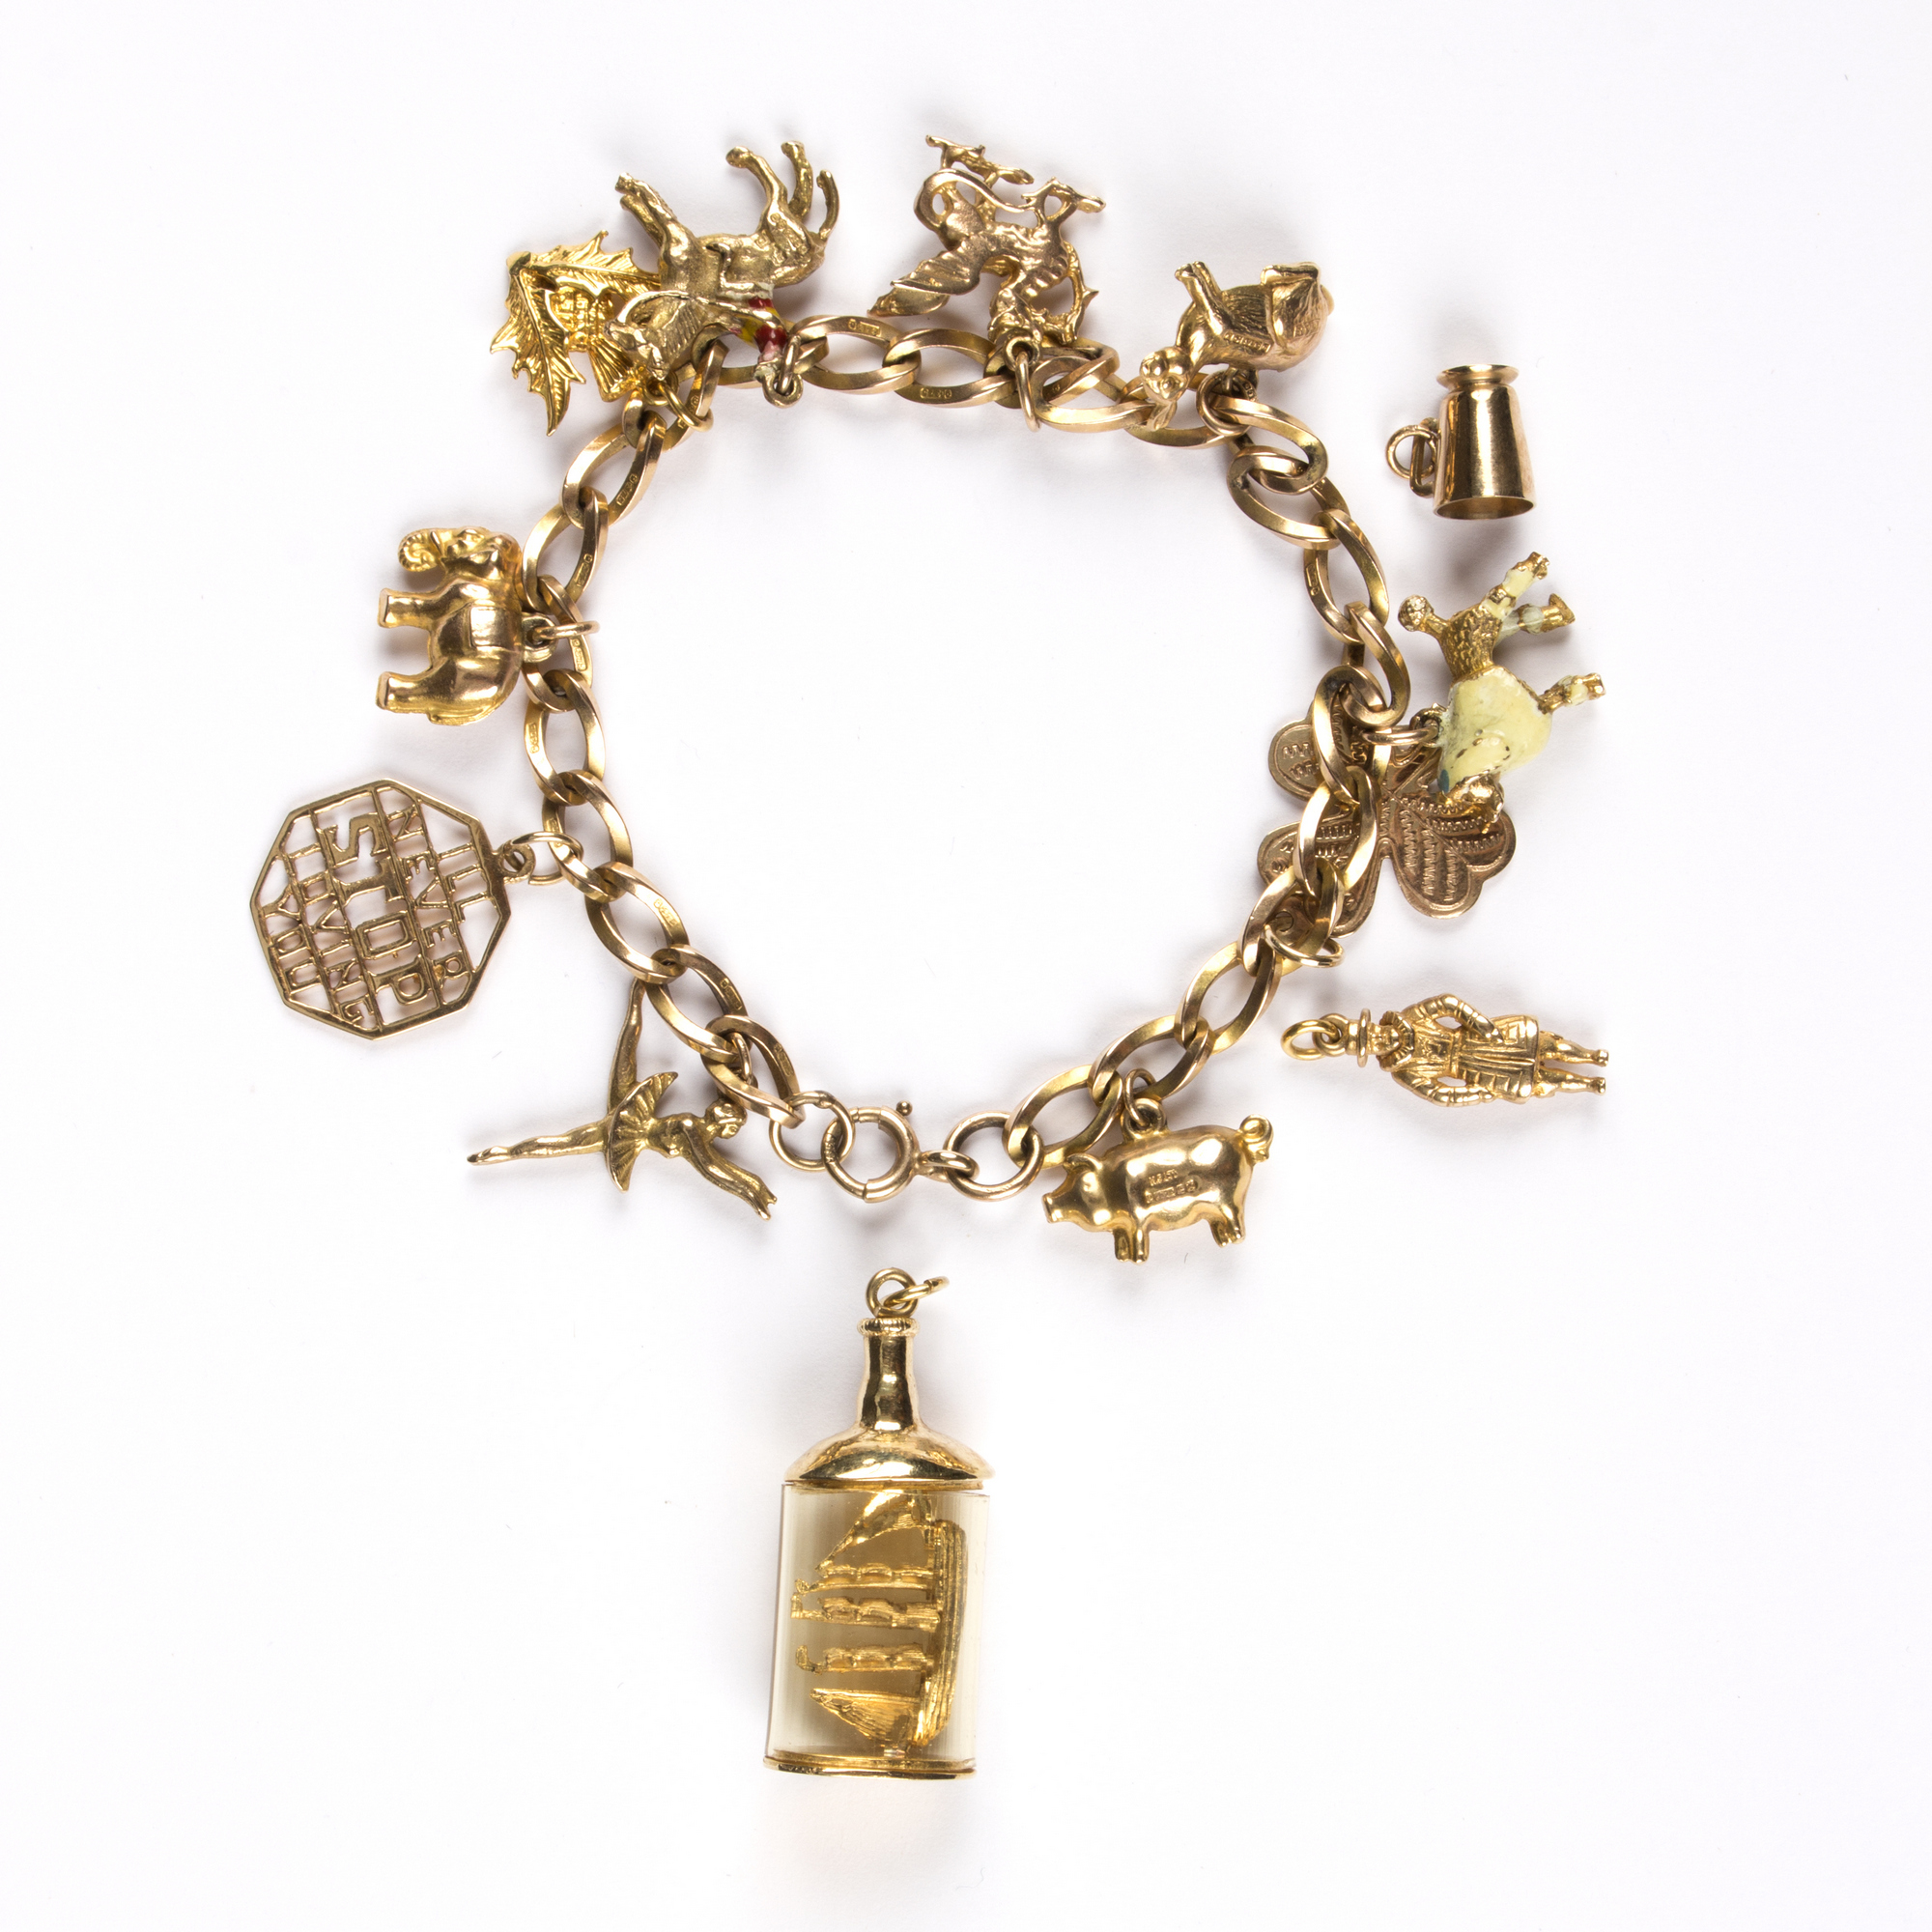 A gold charm bracelet, charms to include a ship in a bottle, a ballerina, Welsh dragon etc.